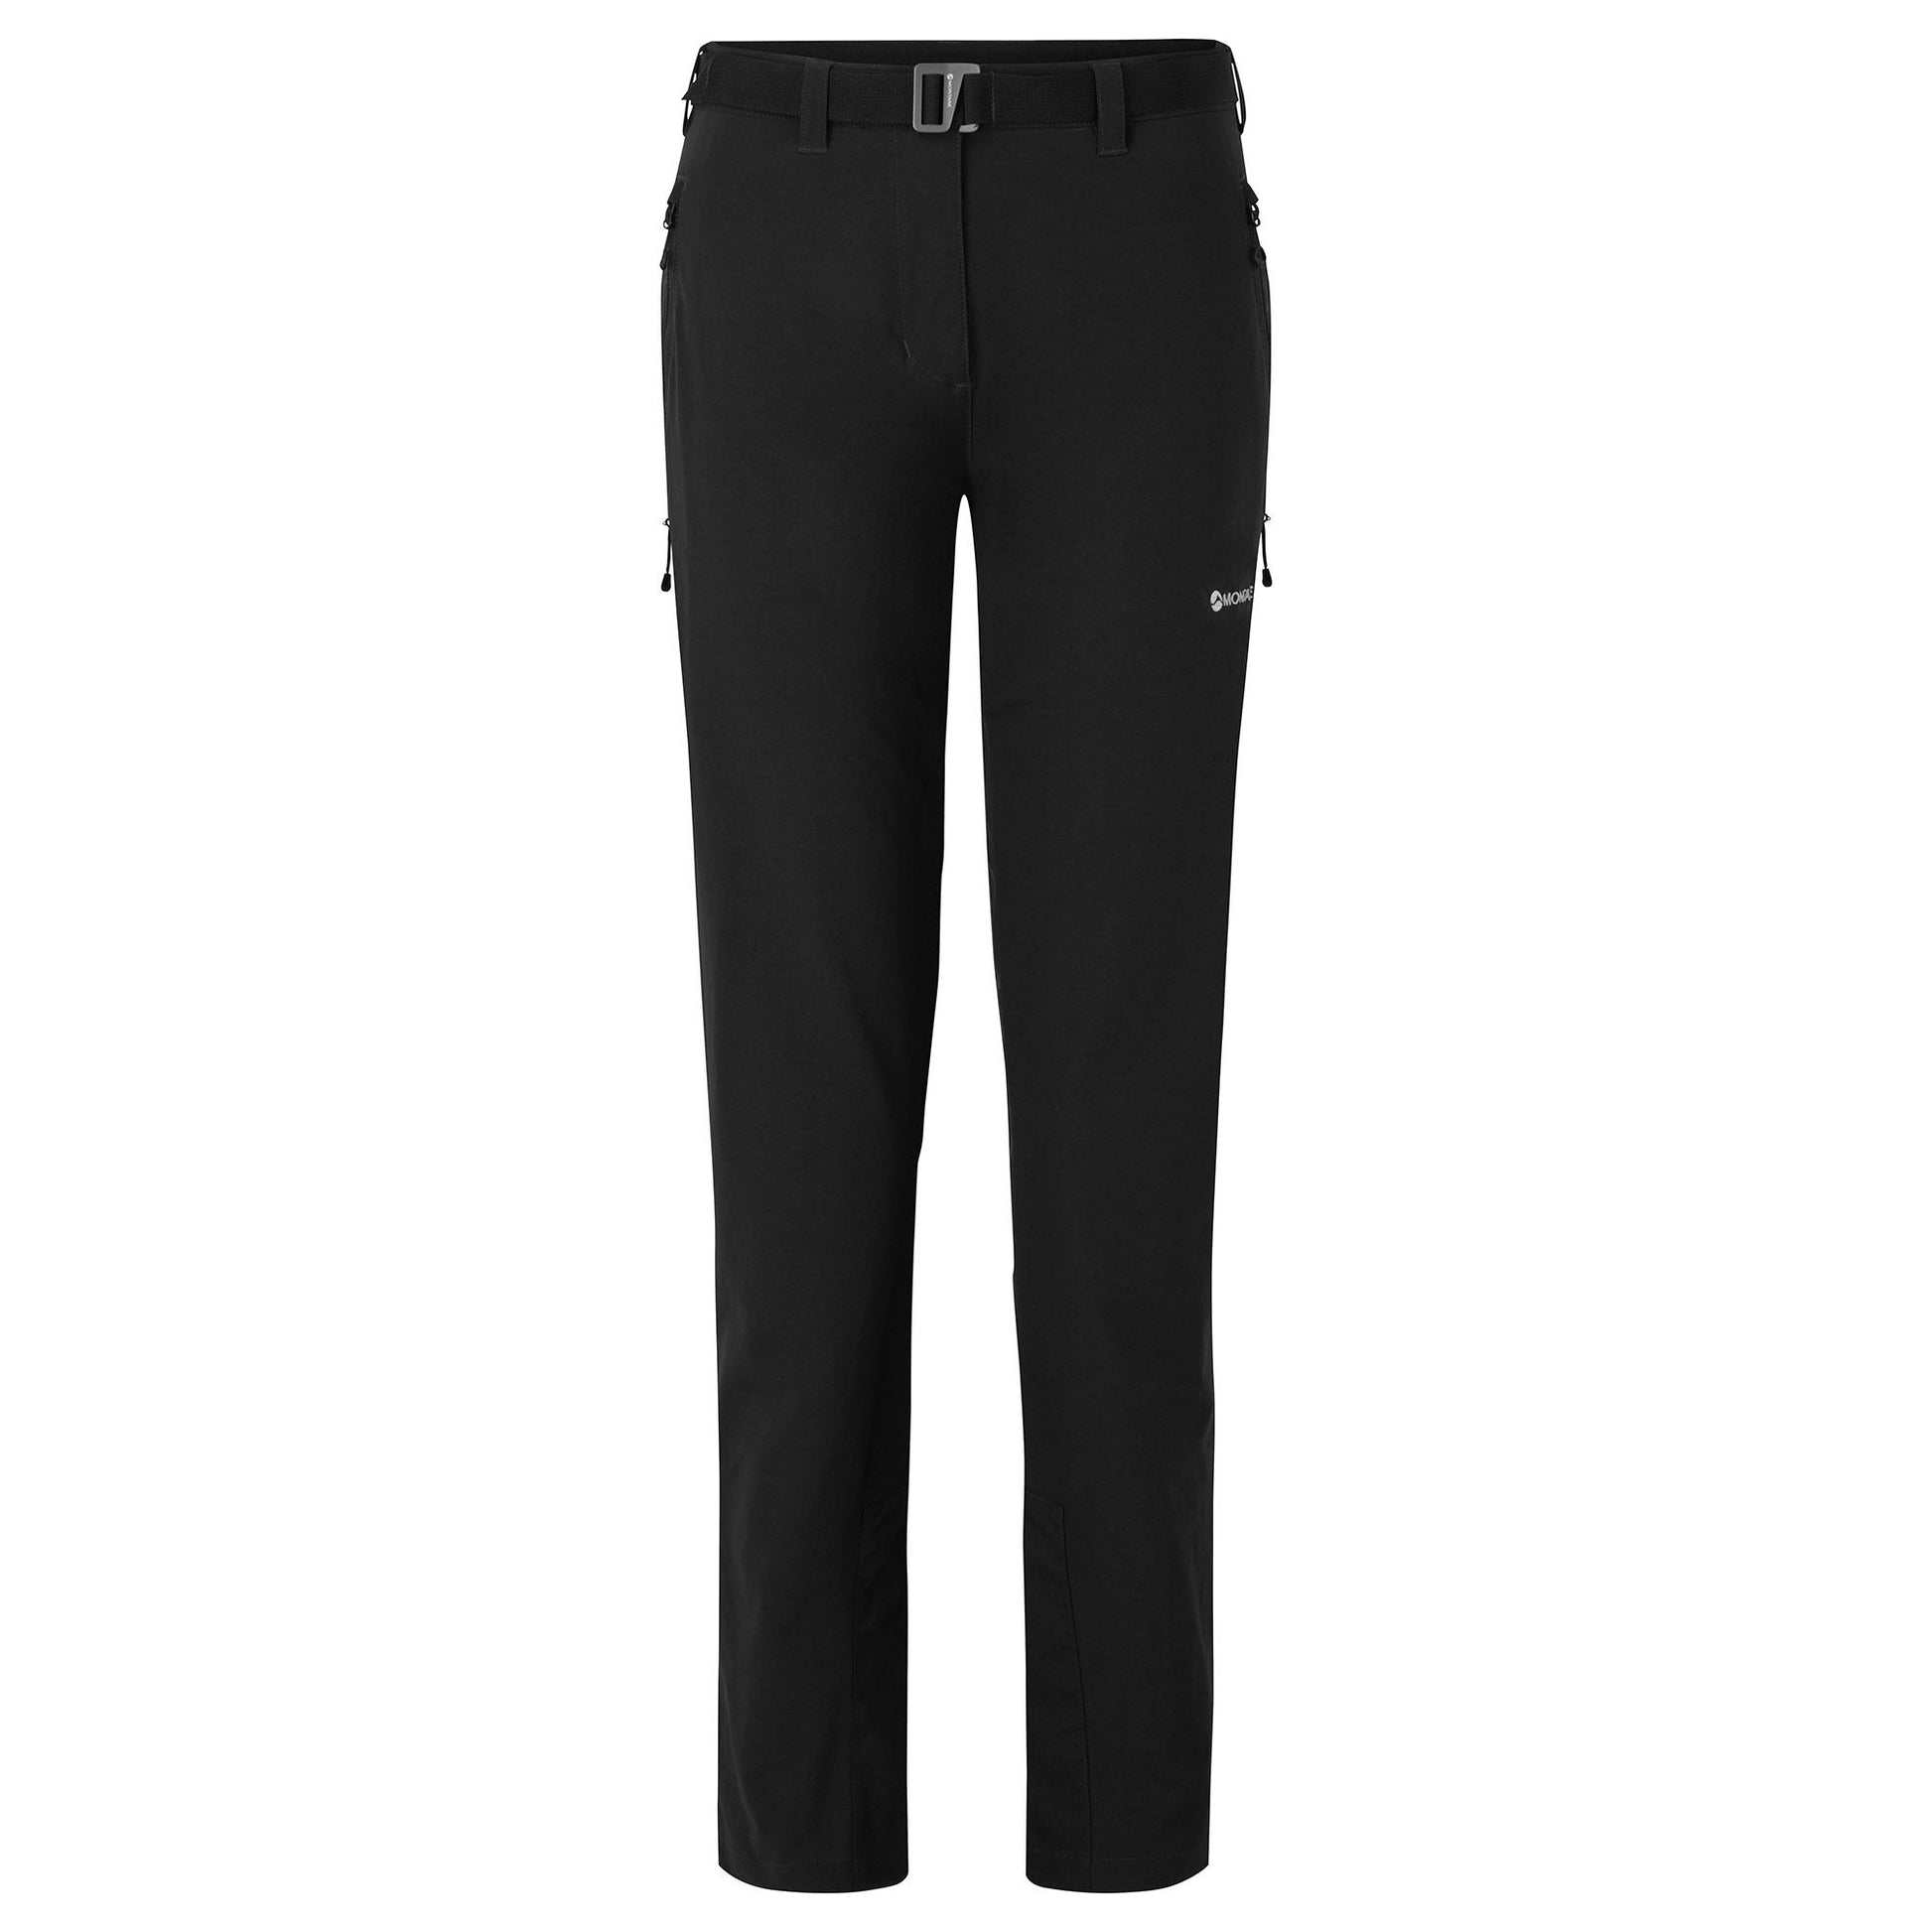 Montane Women's Terra Stretch Trousers Available in three leg lengths  Durable, stretchy women's trousers for multi-activities